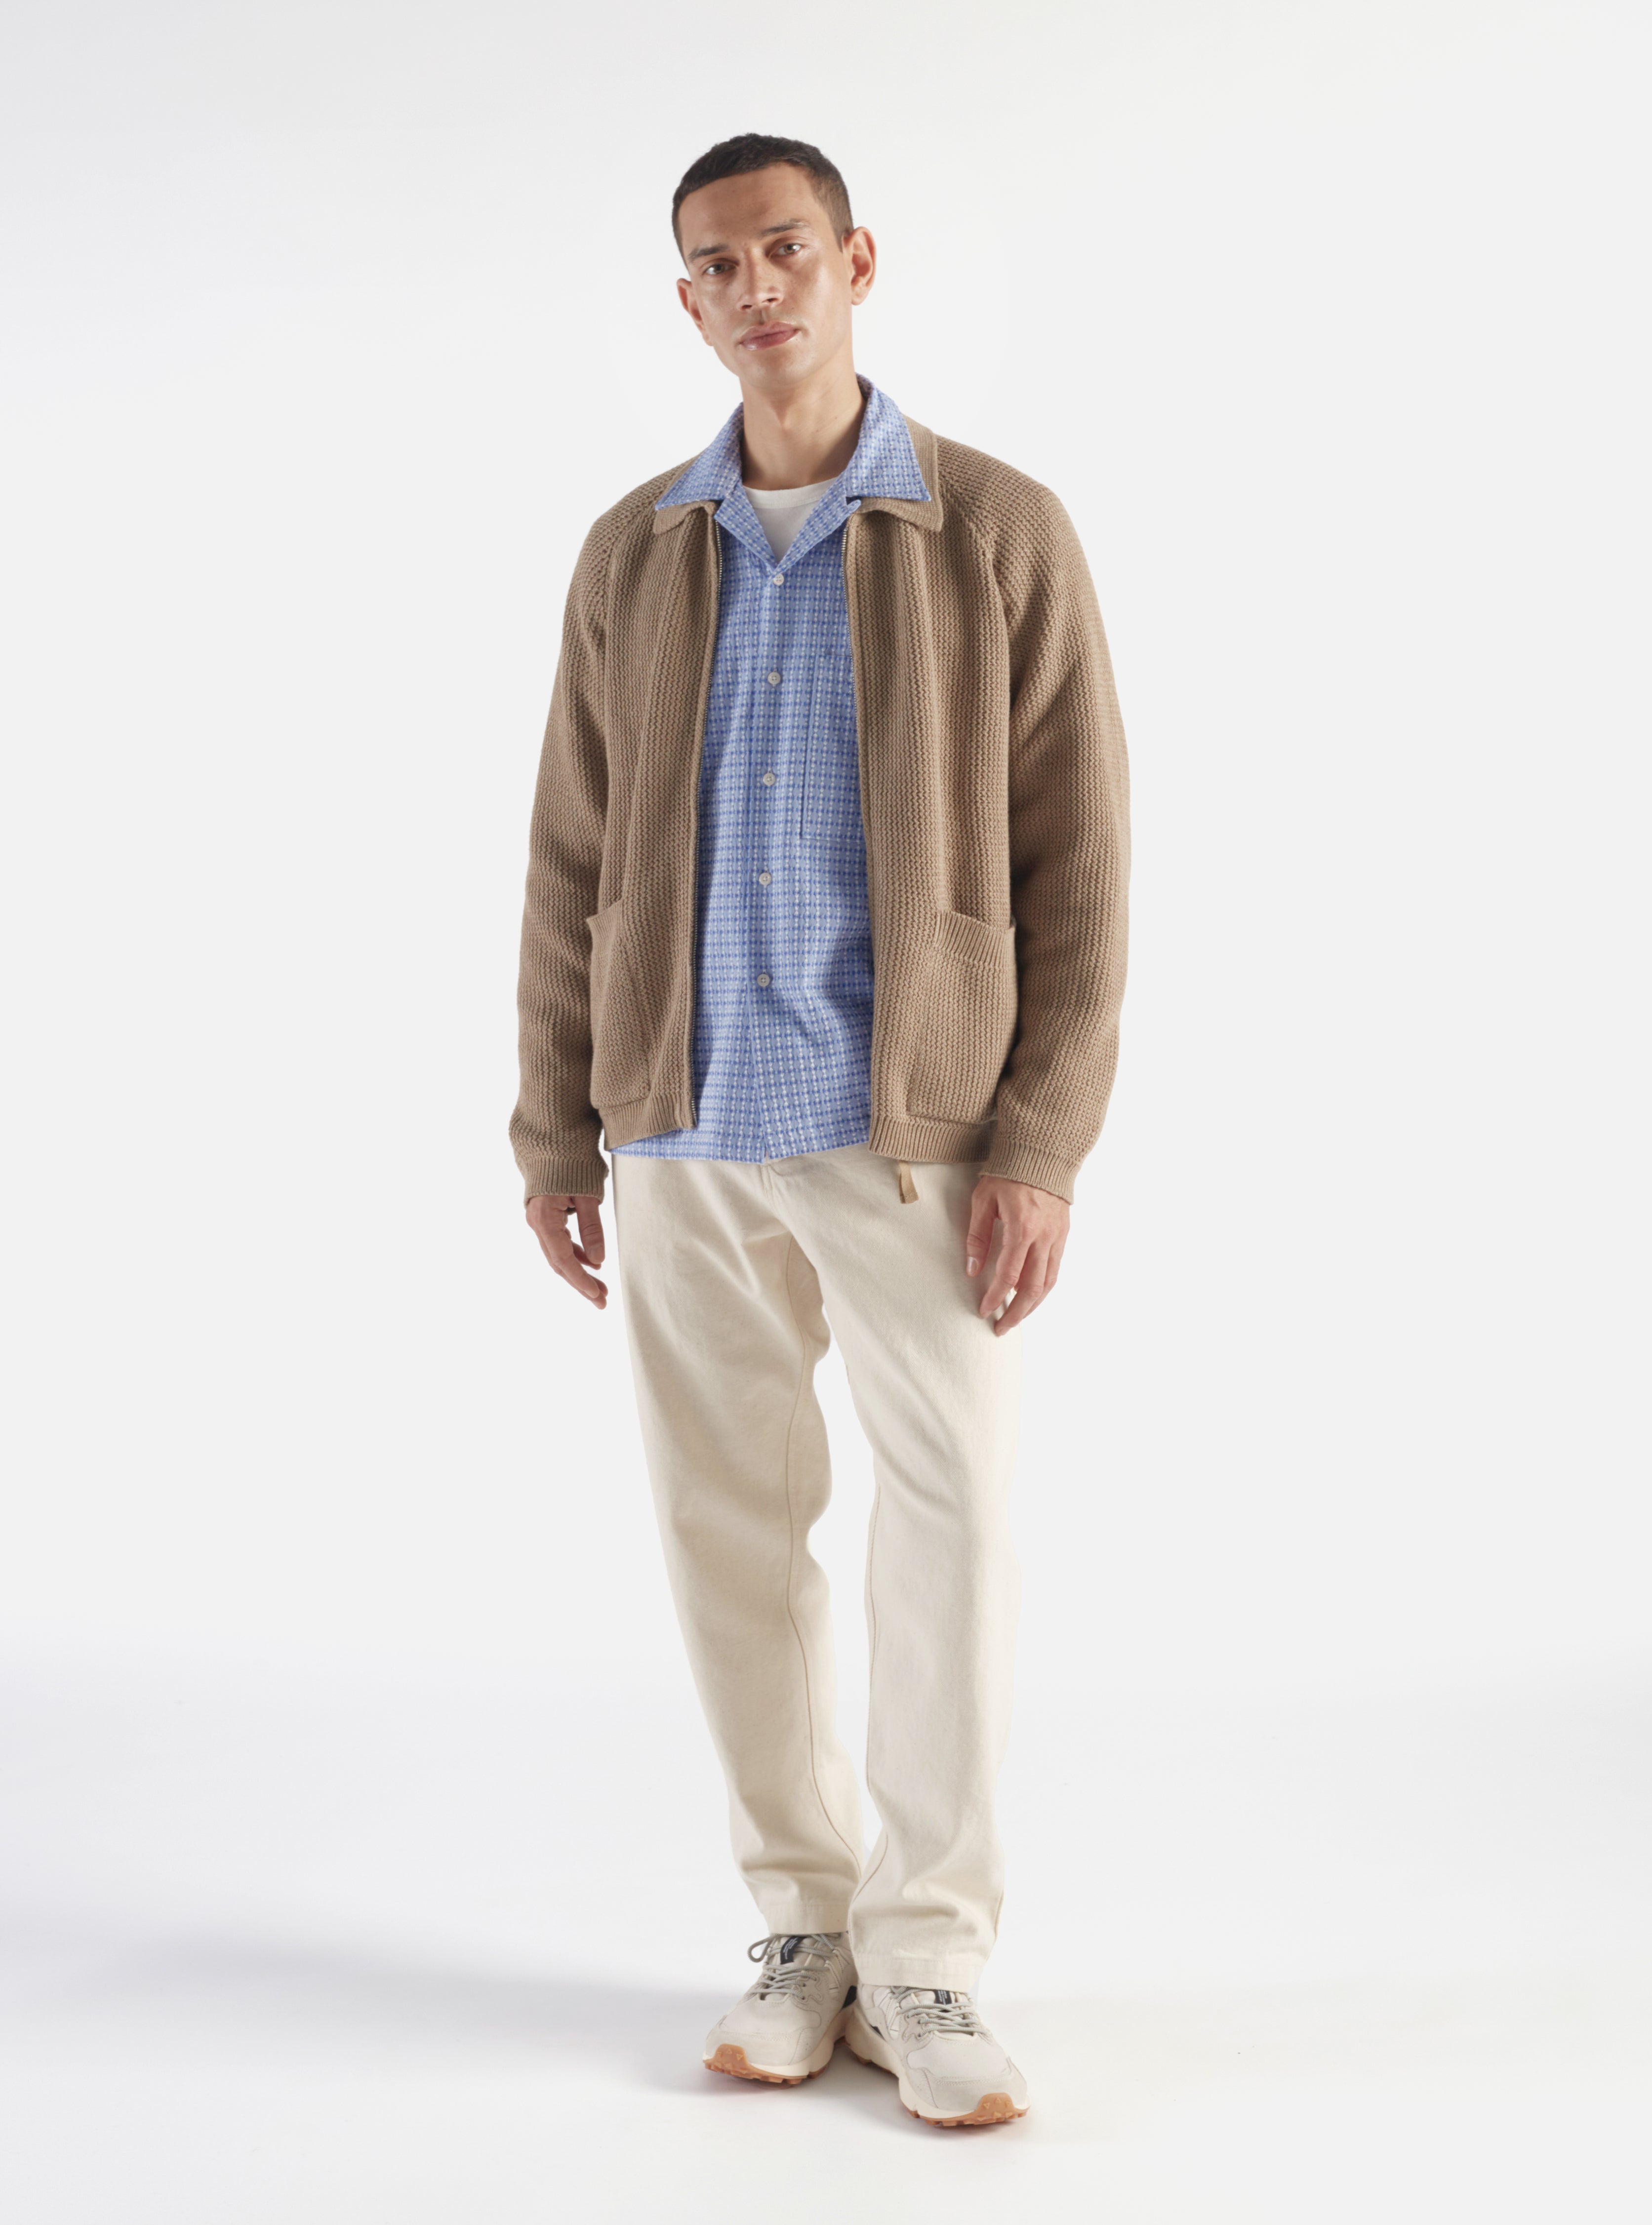 Universal Works Military Chino in Ecru Recycled Cotton